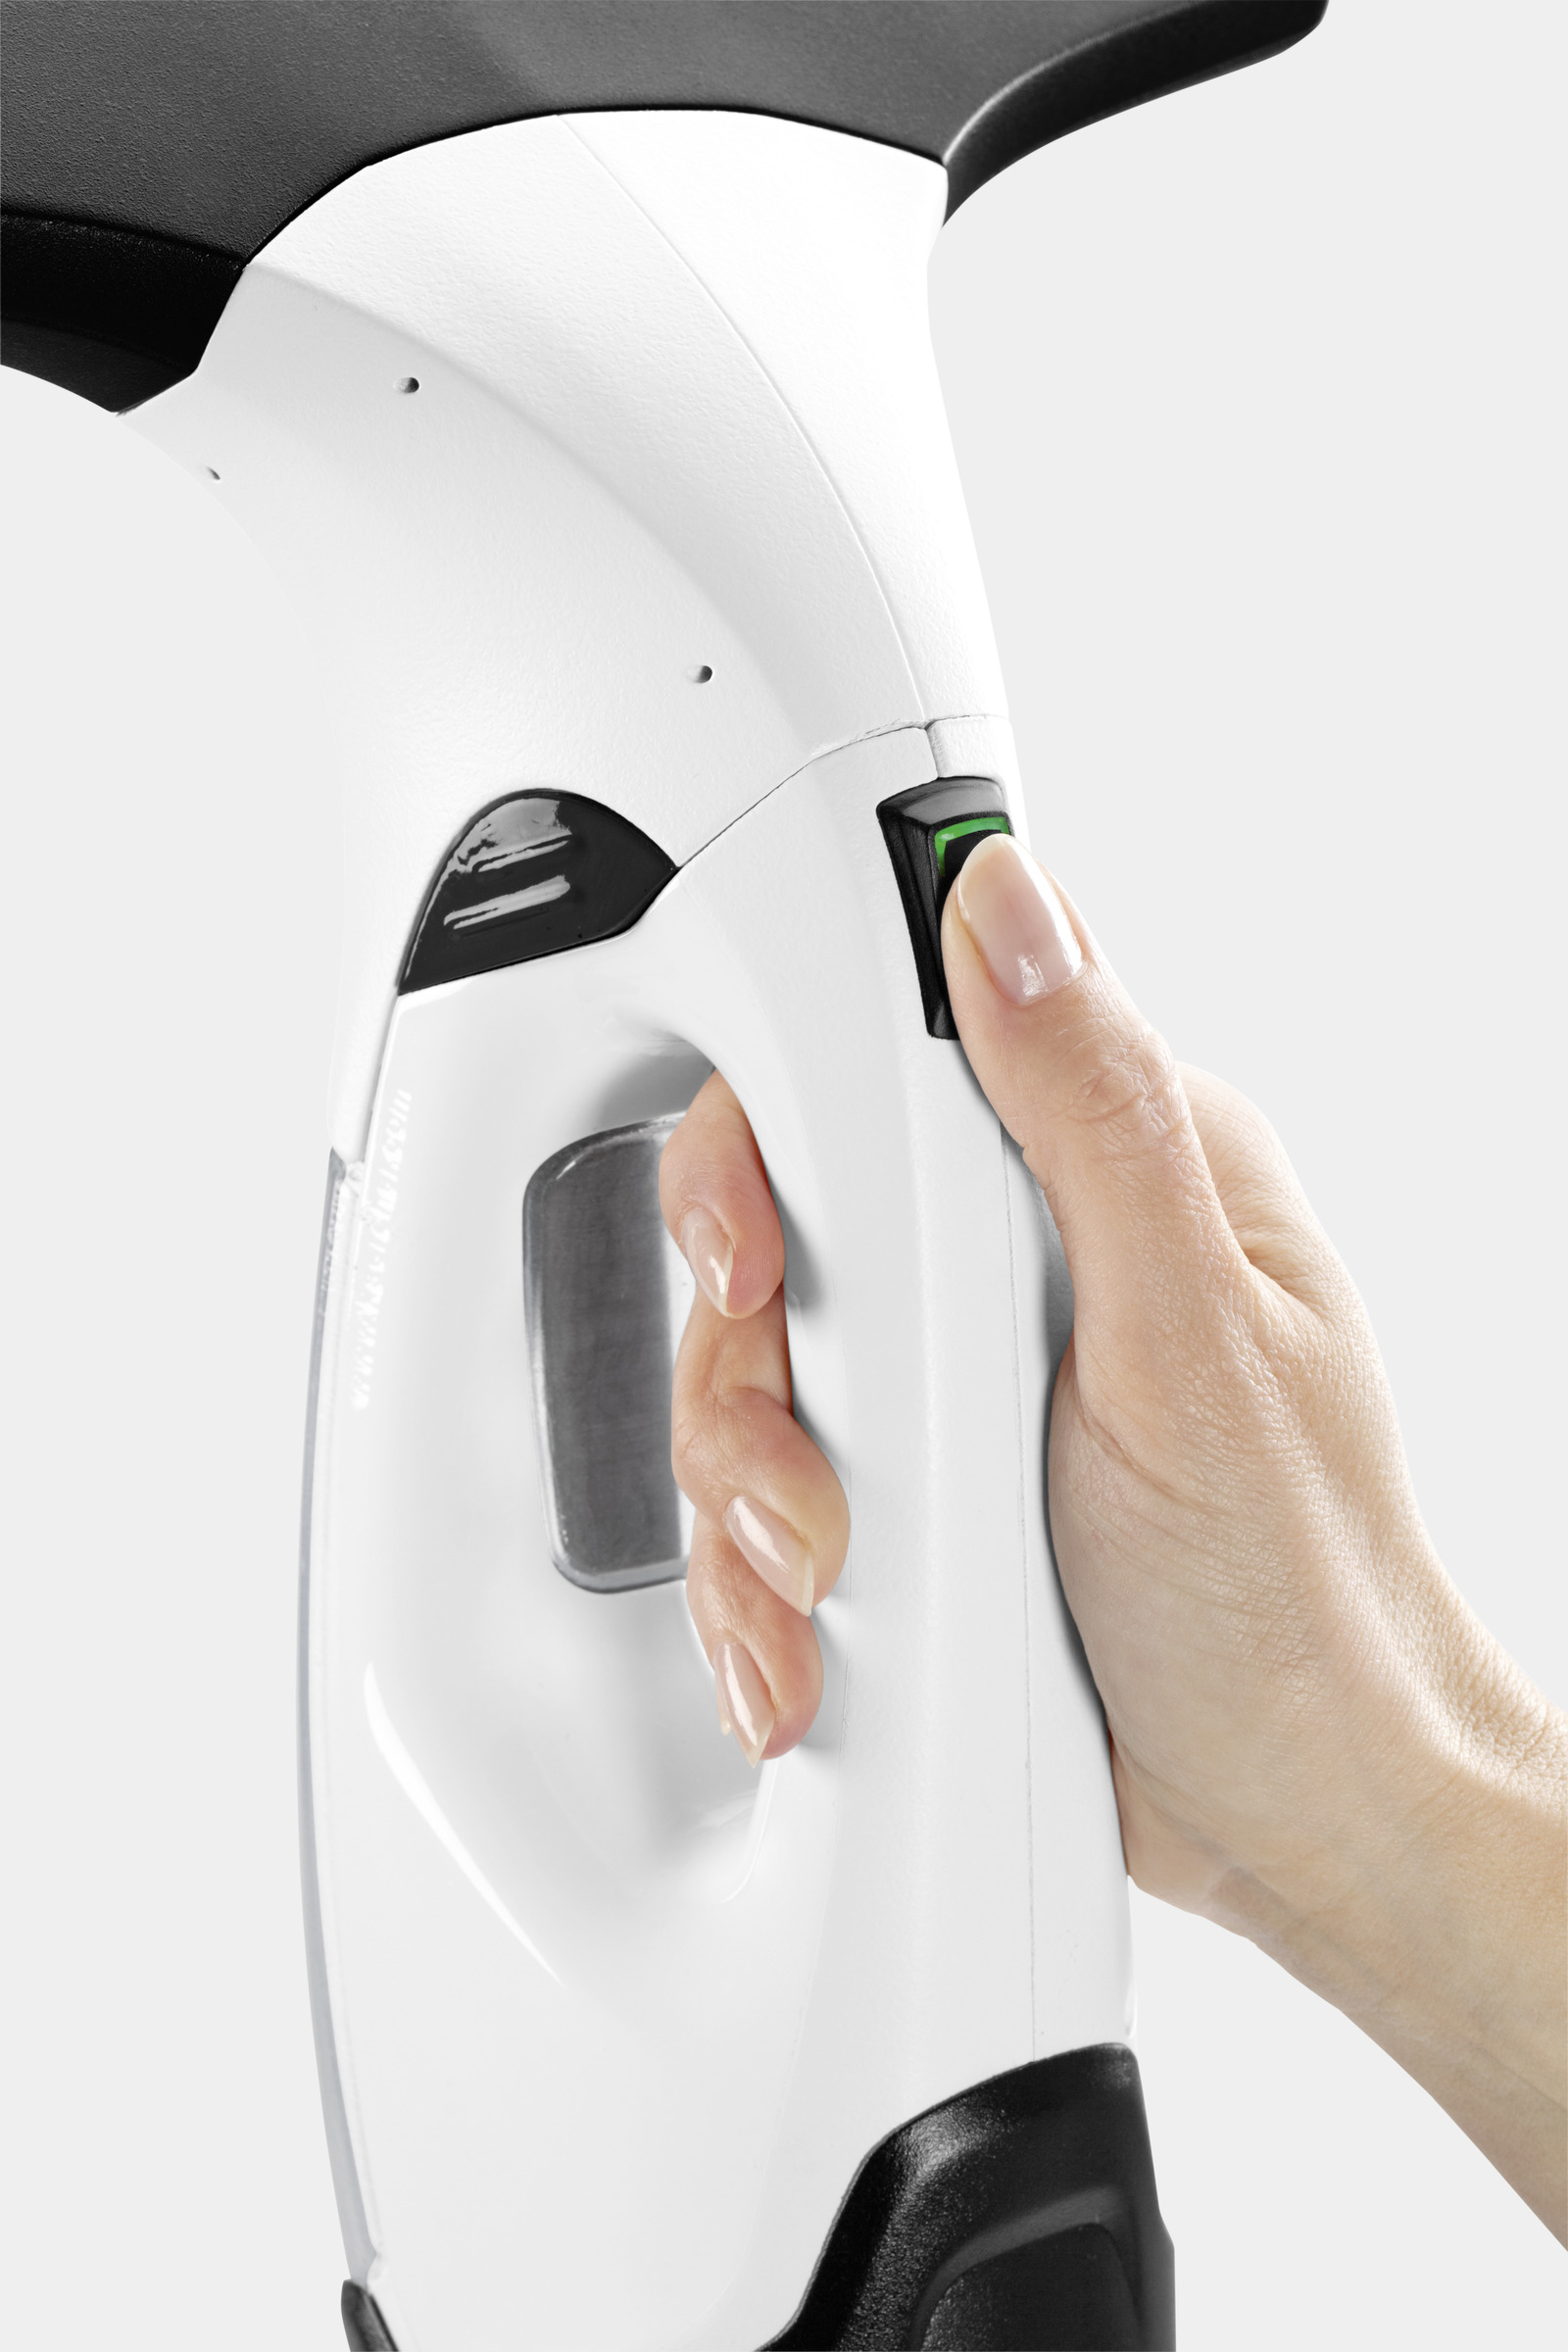 Kärcher WV2 Plus Window Vacuum Cleaner 🧽 The Kärcher WV 2 Plus is an  innovative handheld cleaner that effortlessly sucks up moisture leaving  surfaces, By Expert Electrical